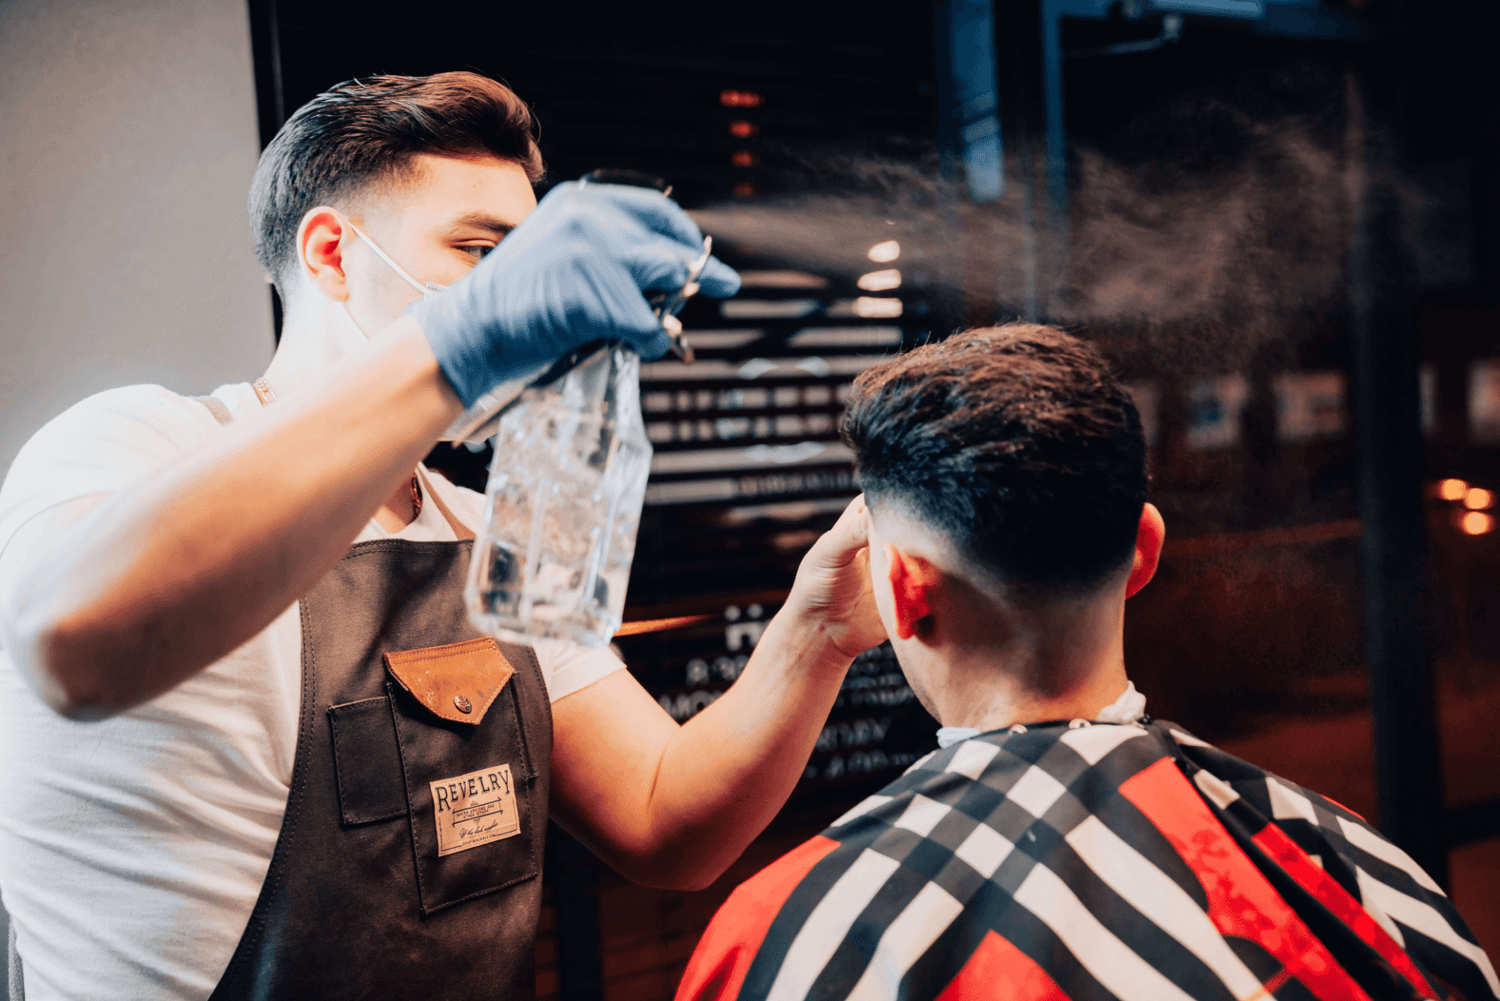 Barber spraying customer with water to prepare for a haircut.